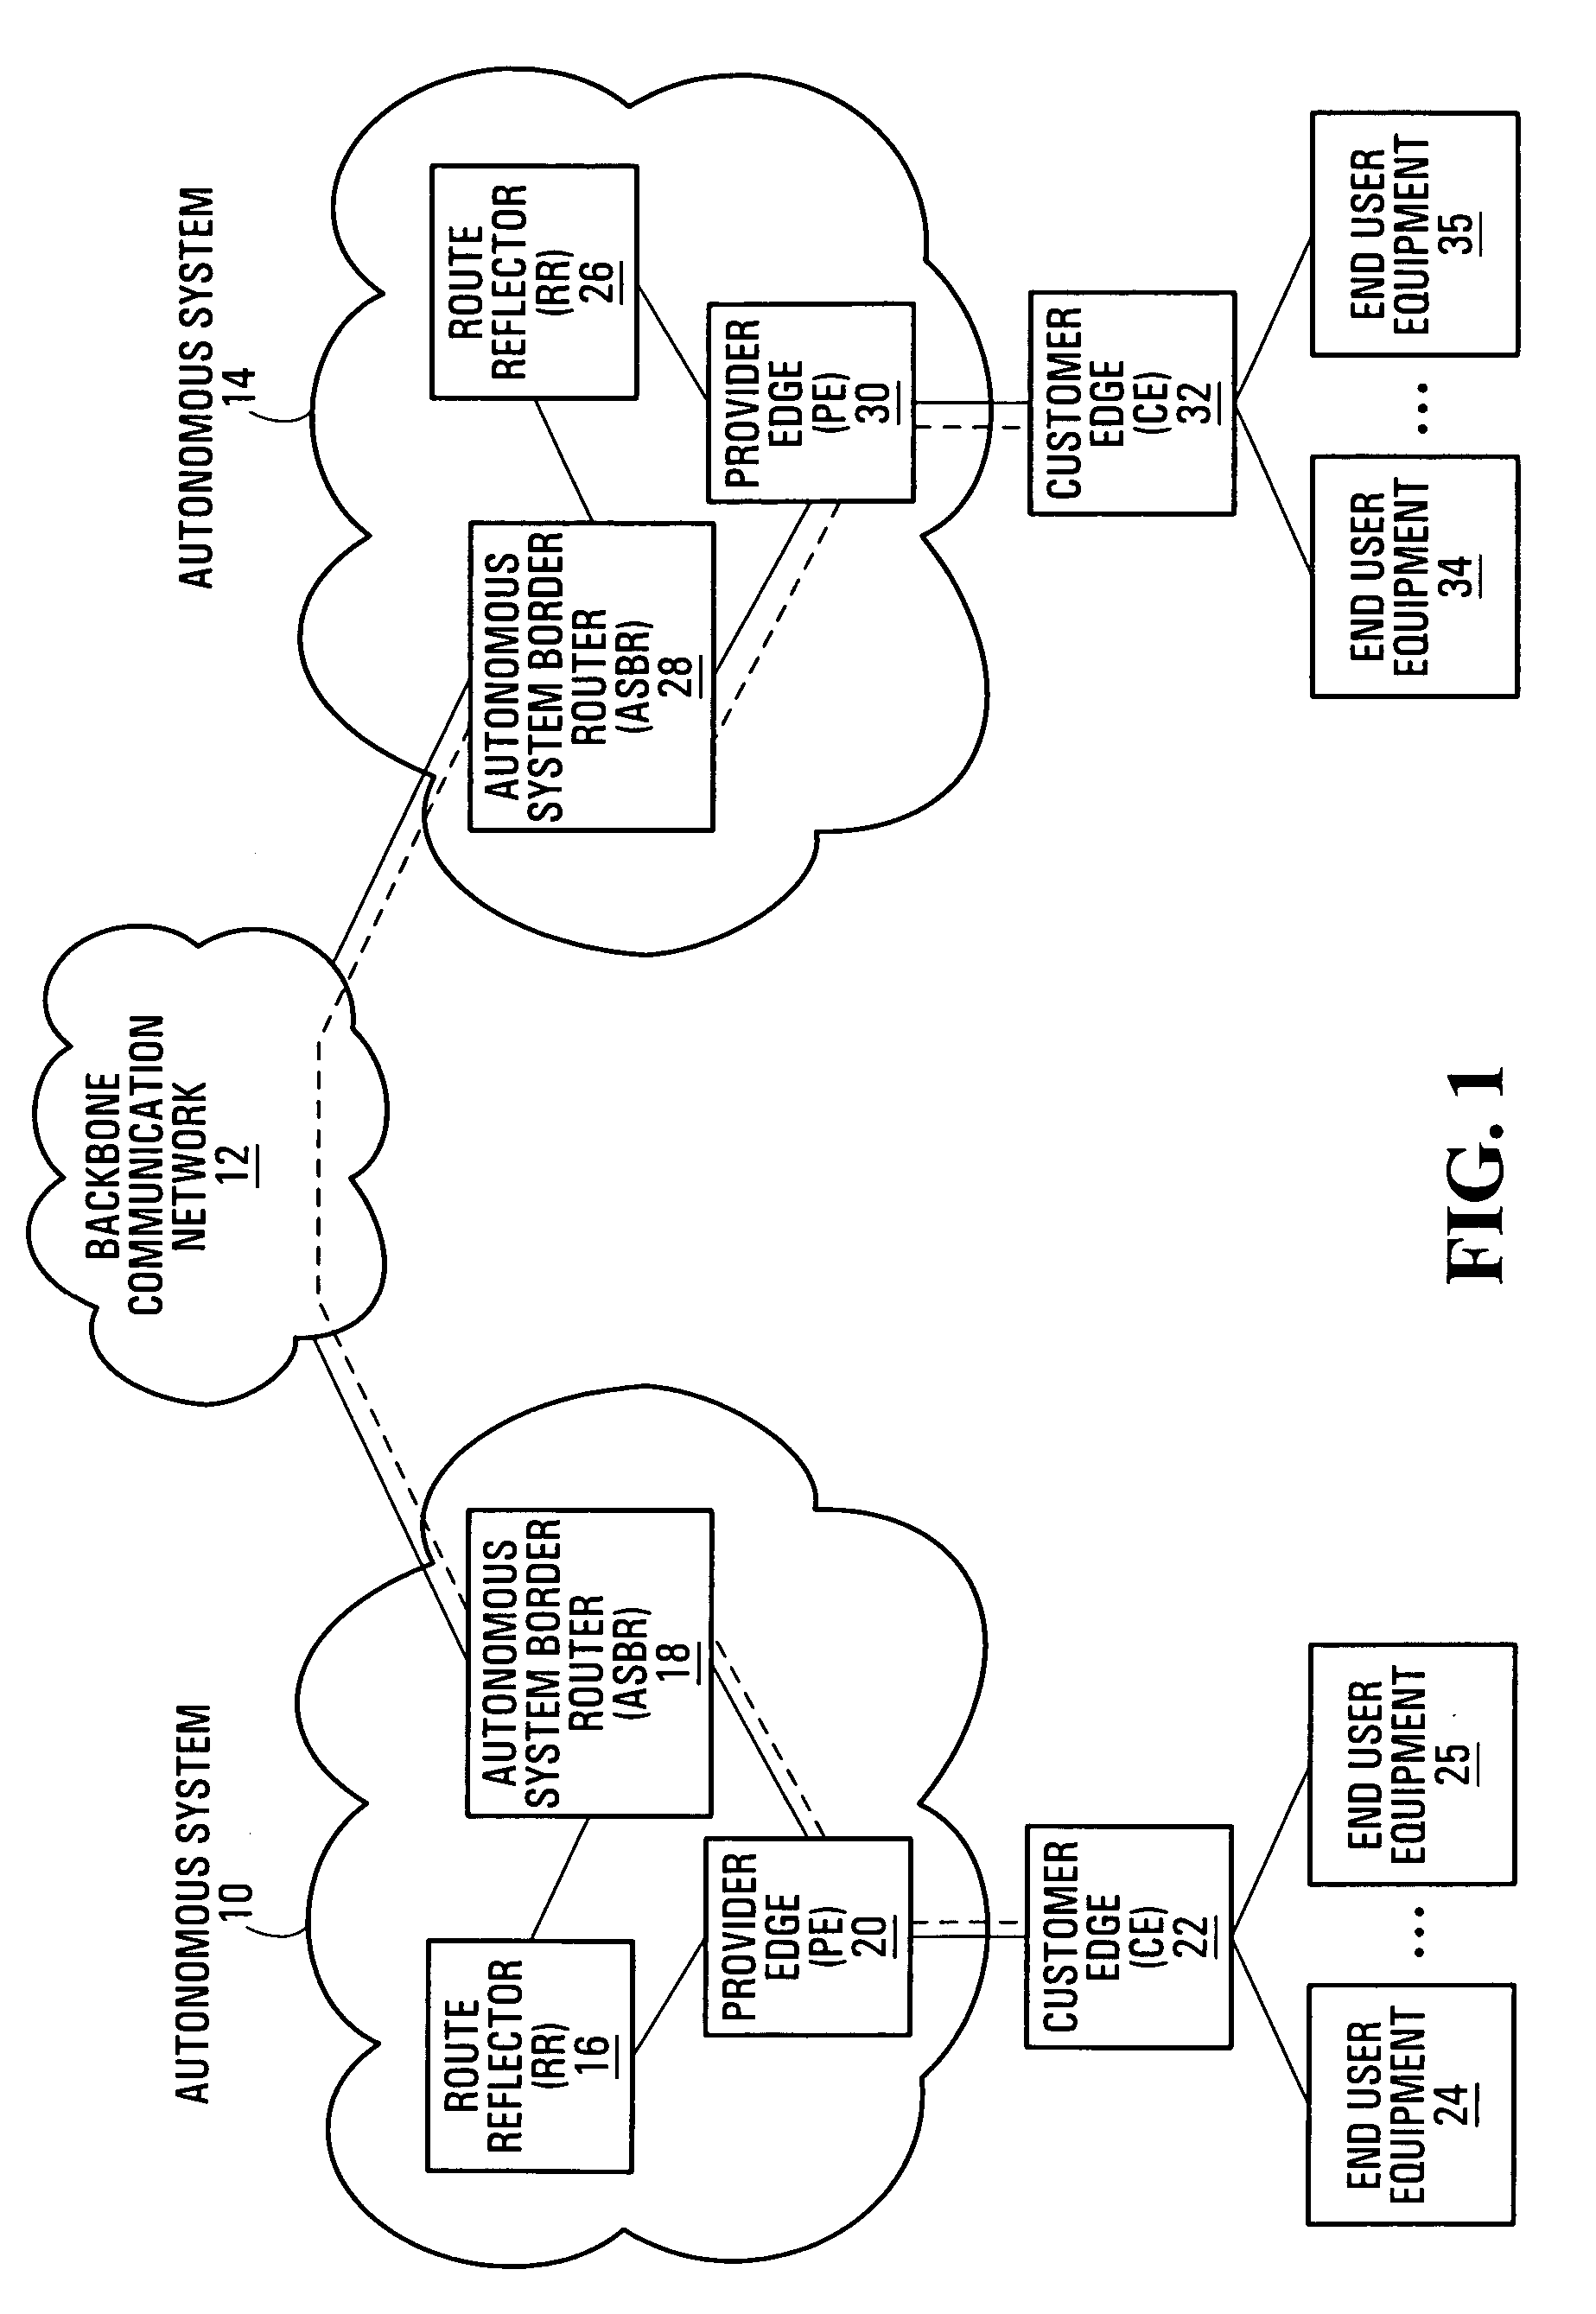 Virtual private networking methods and systems